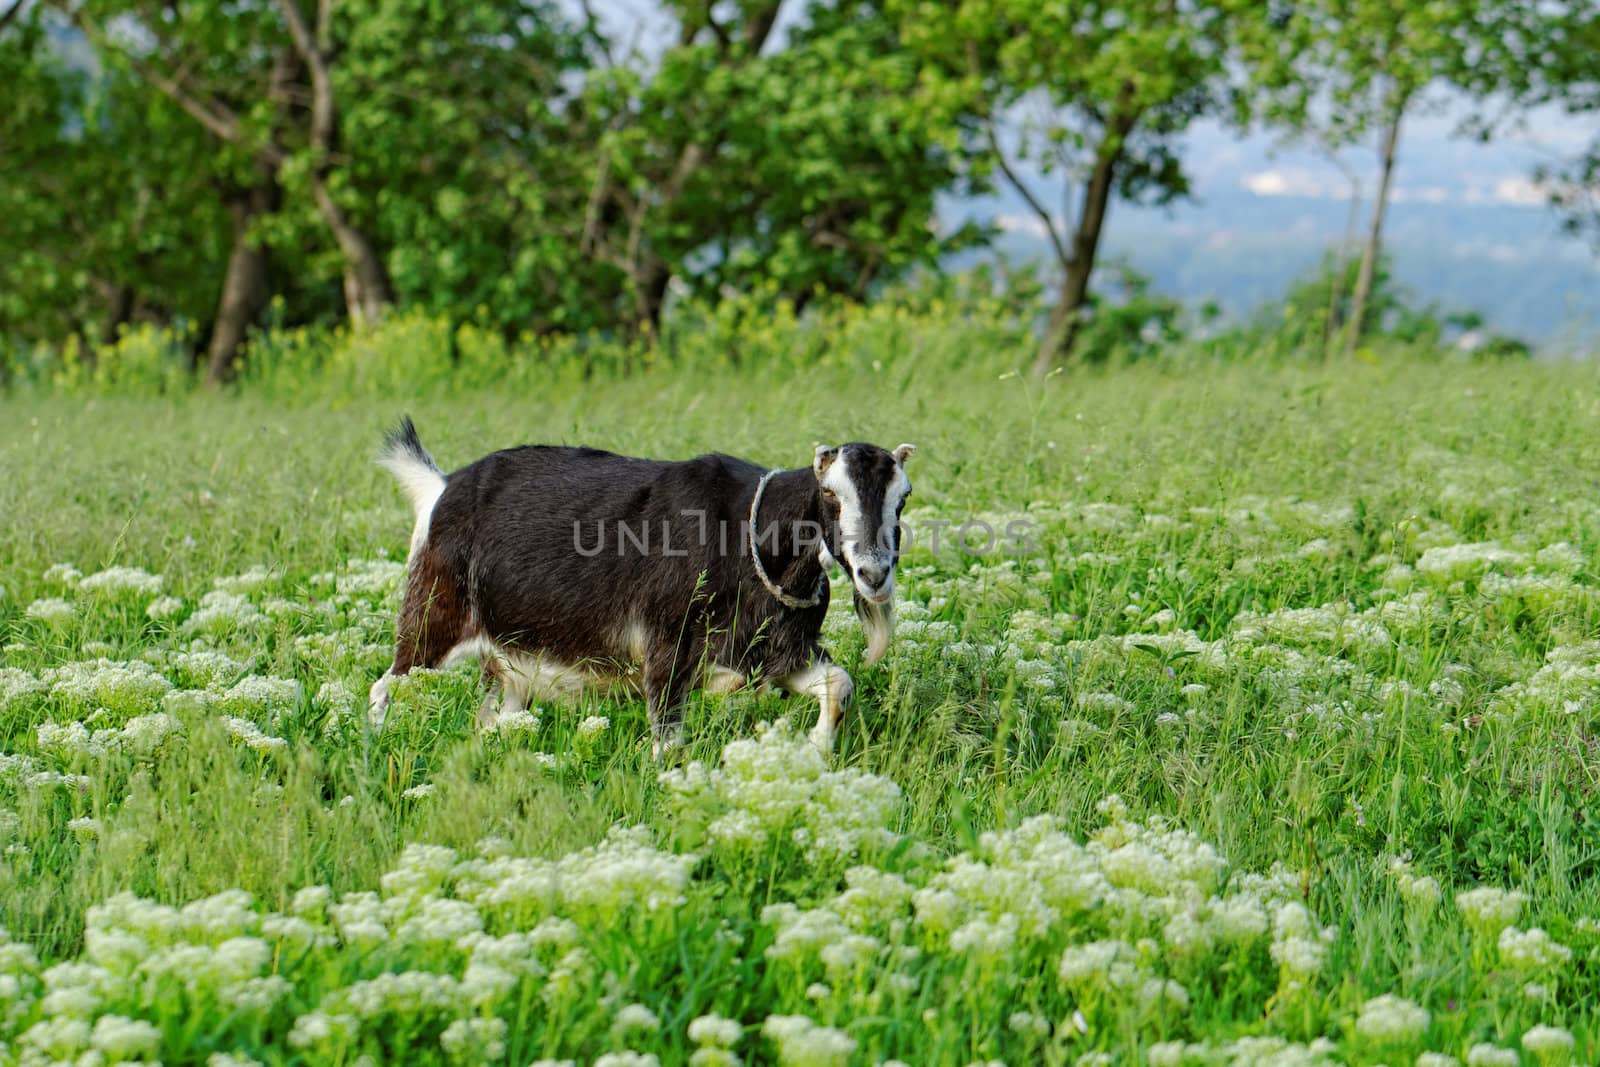 Goats grazing in the meadow